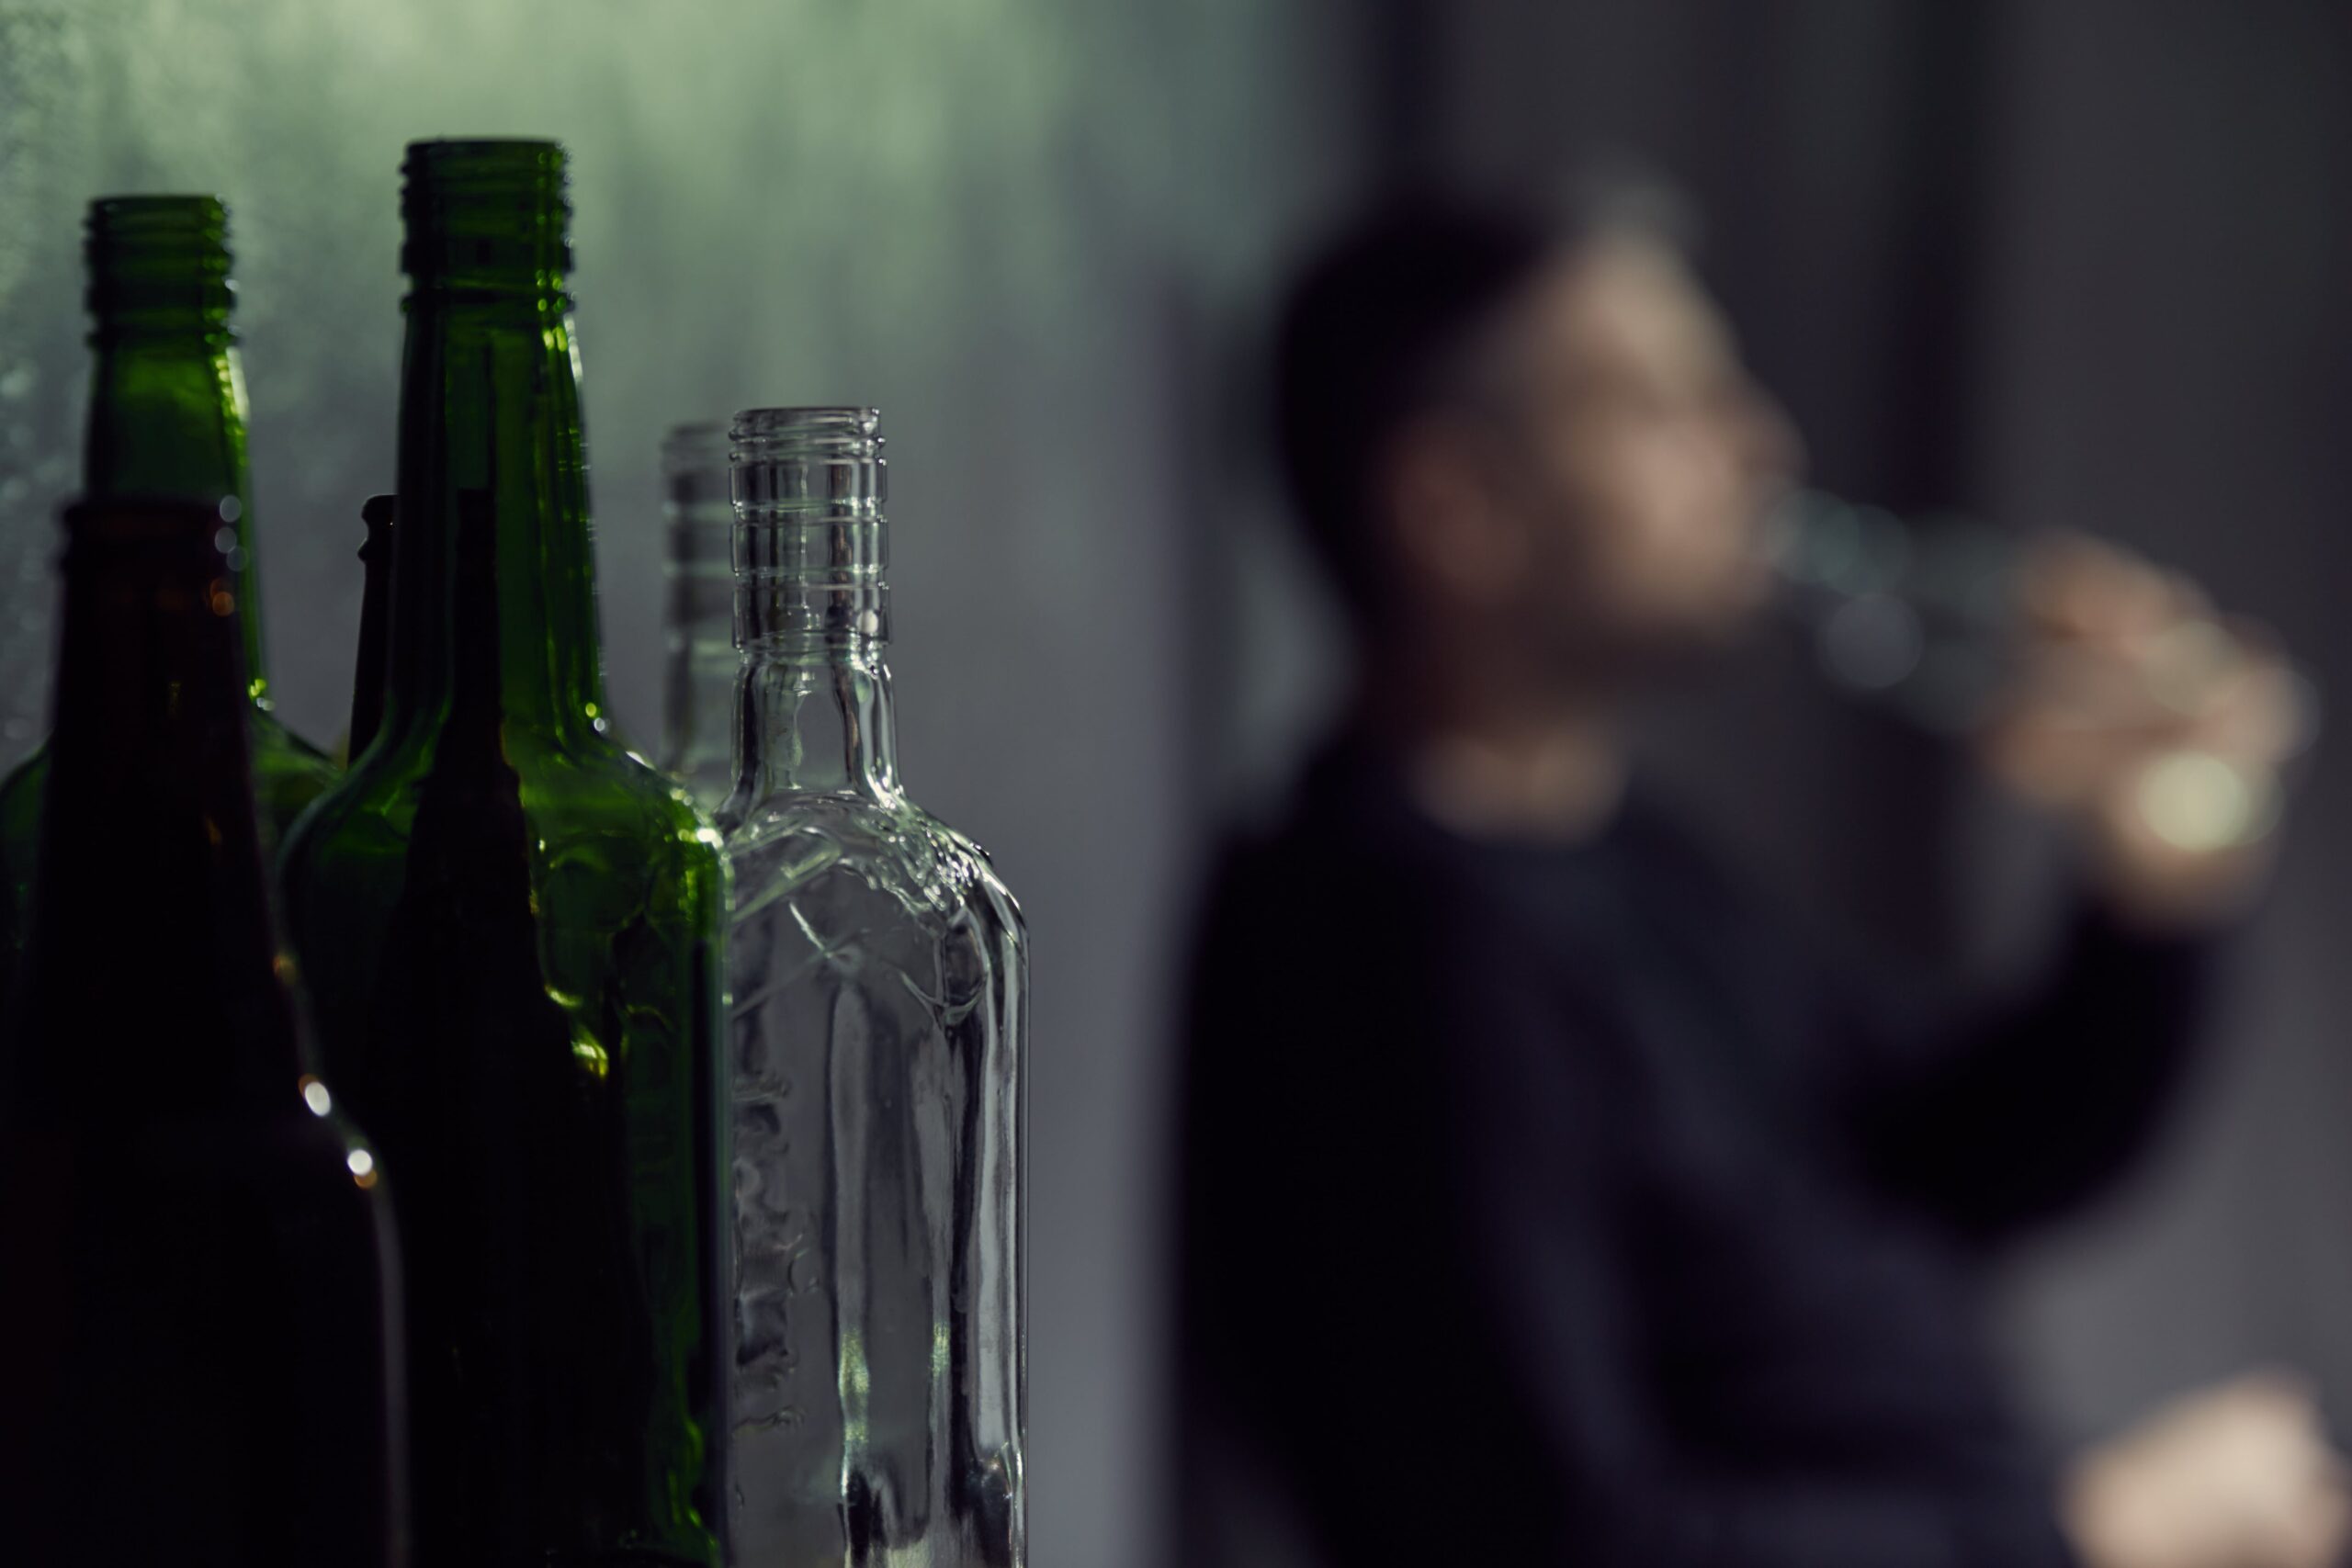 How Does Alcohol Become Addictive?